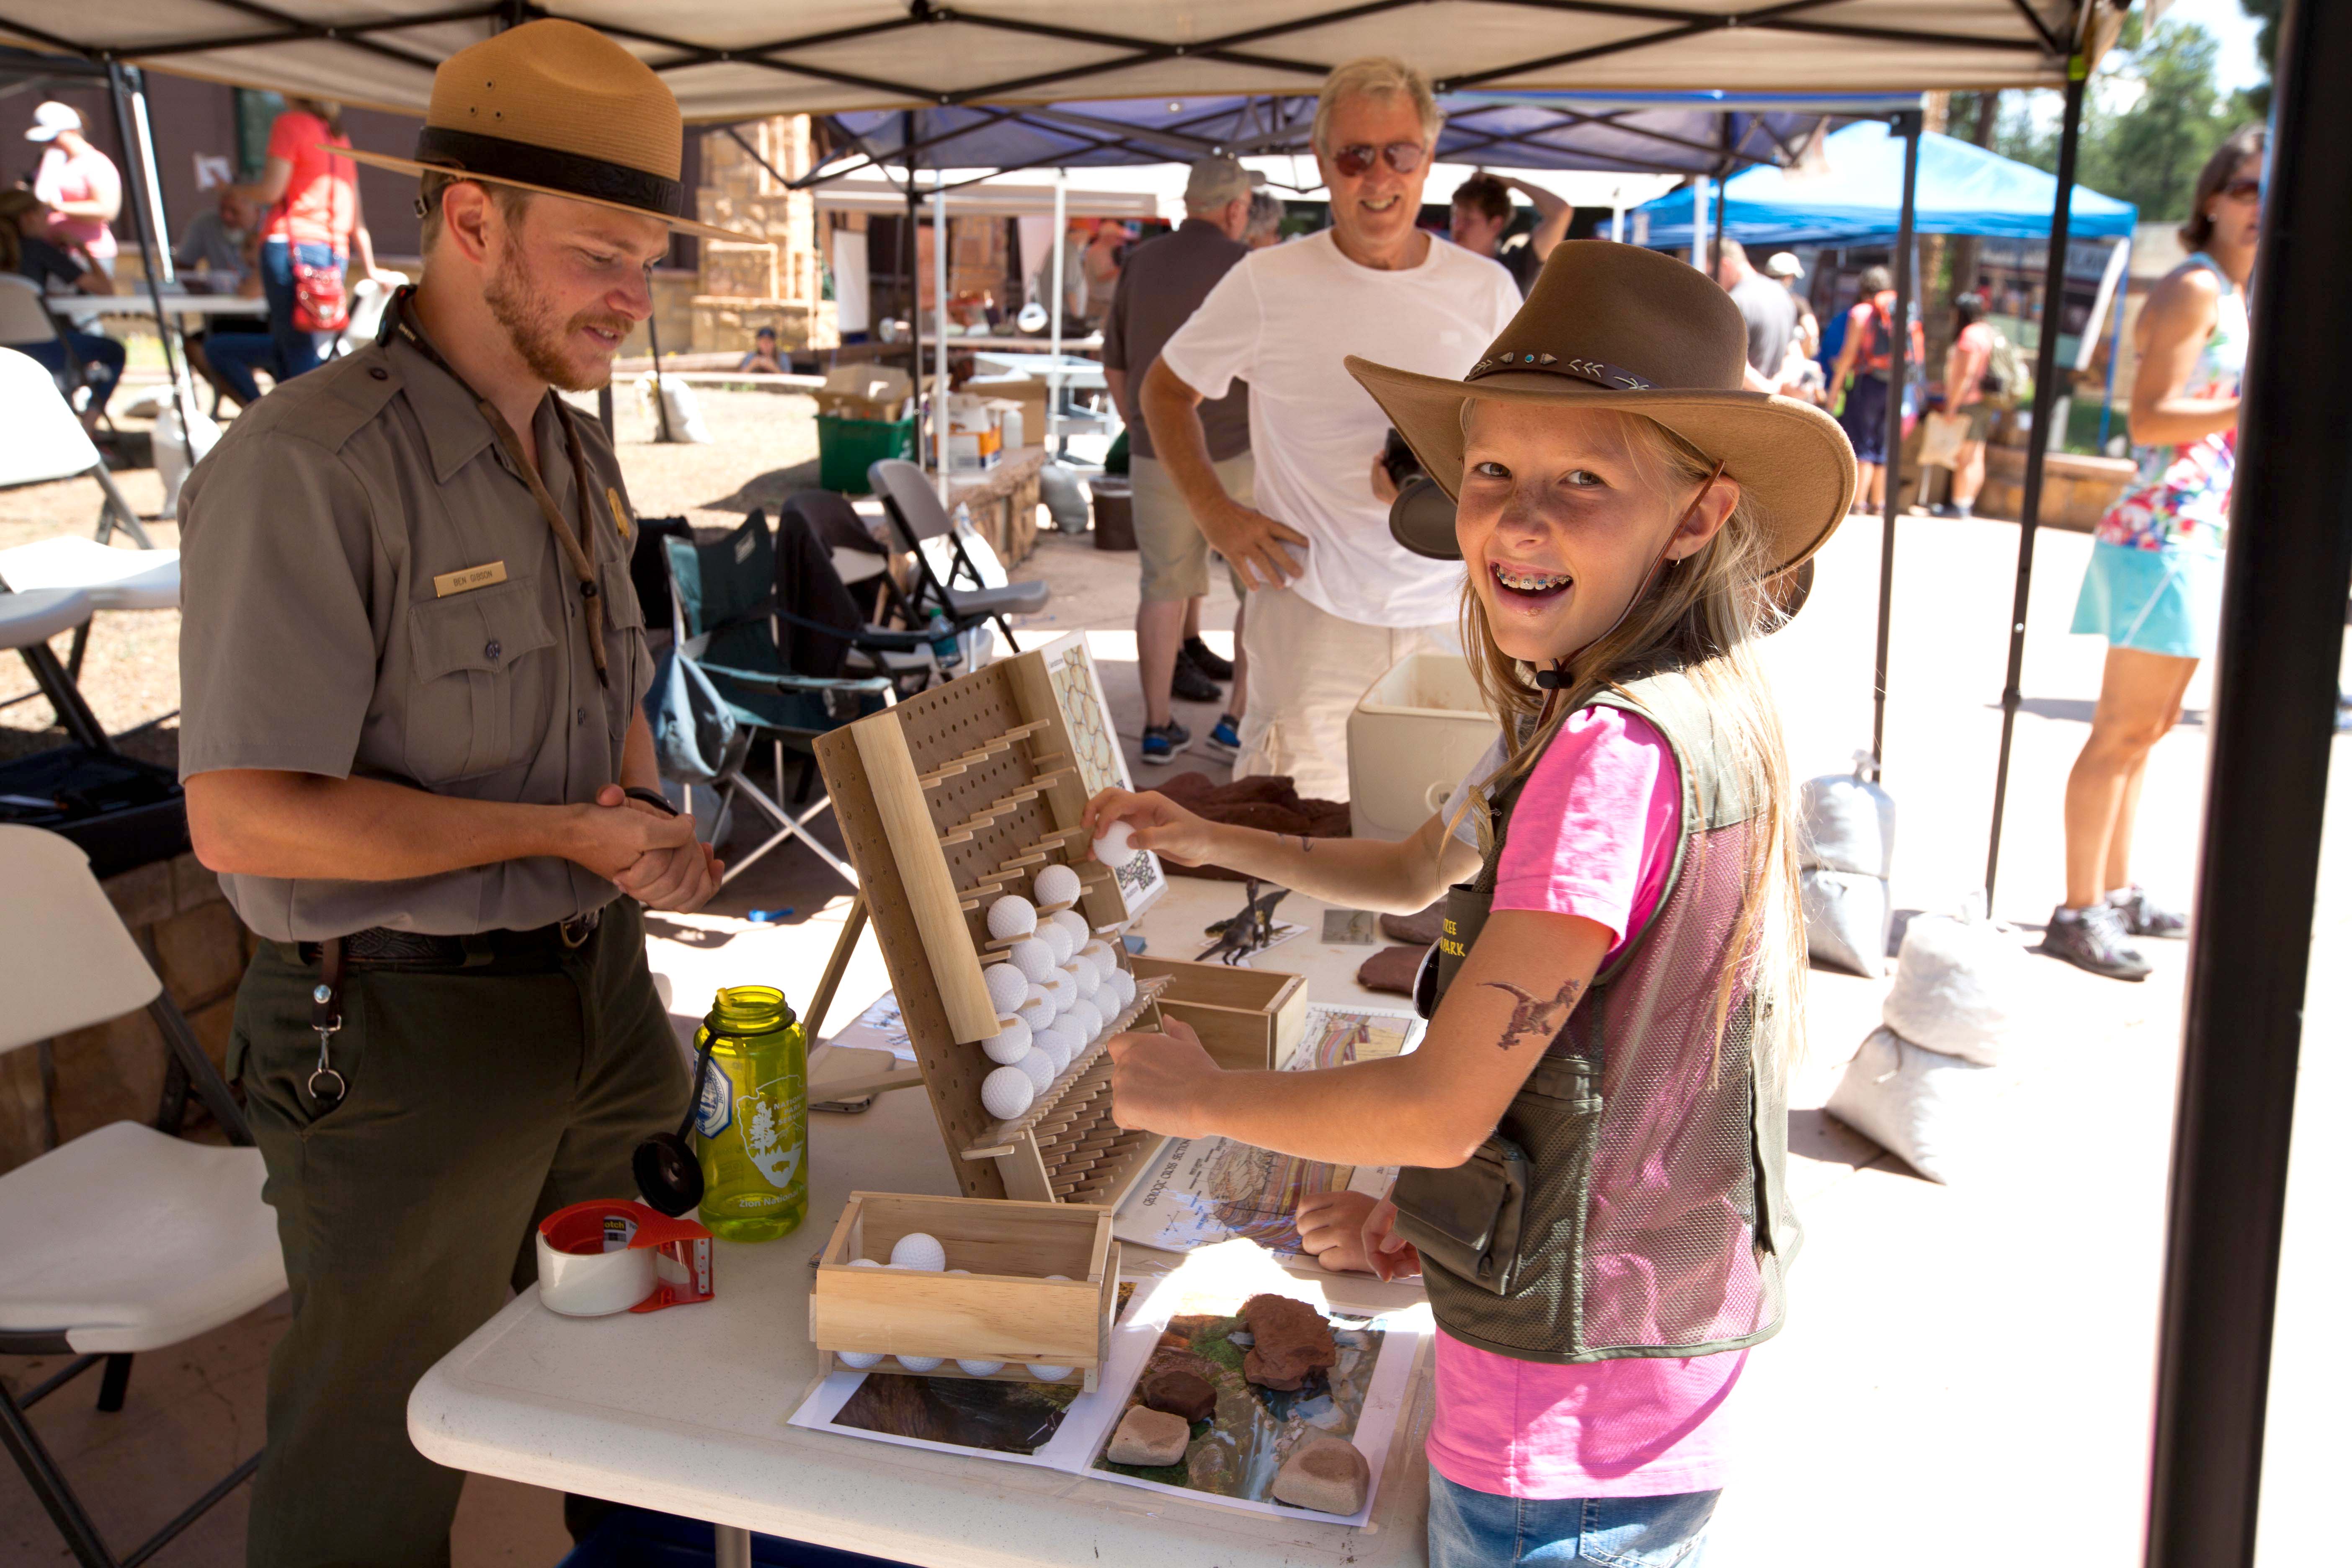 A young woman and a park ranger stand at an activity booth.